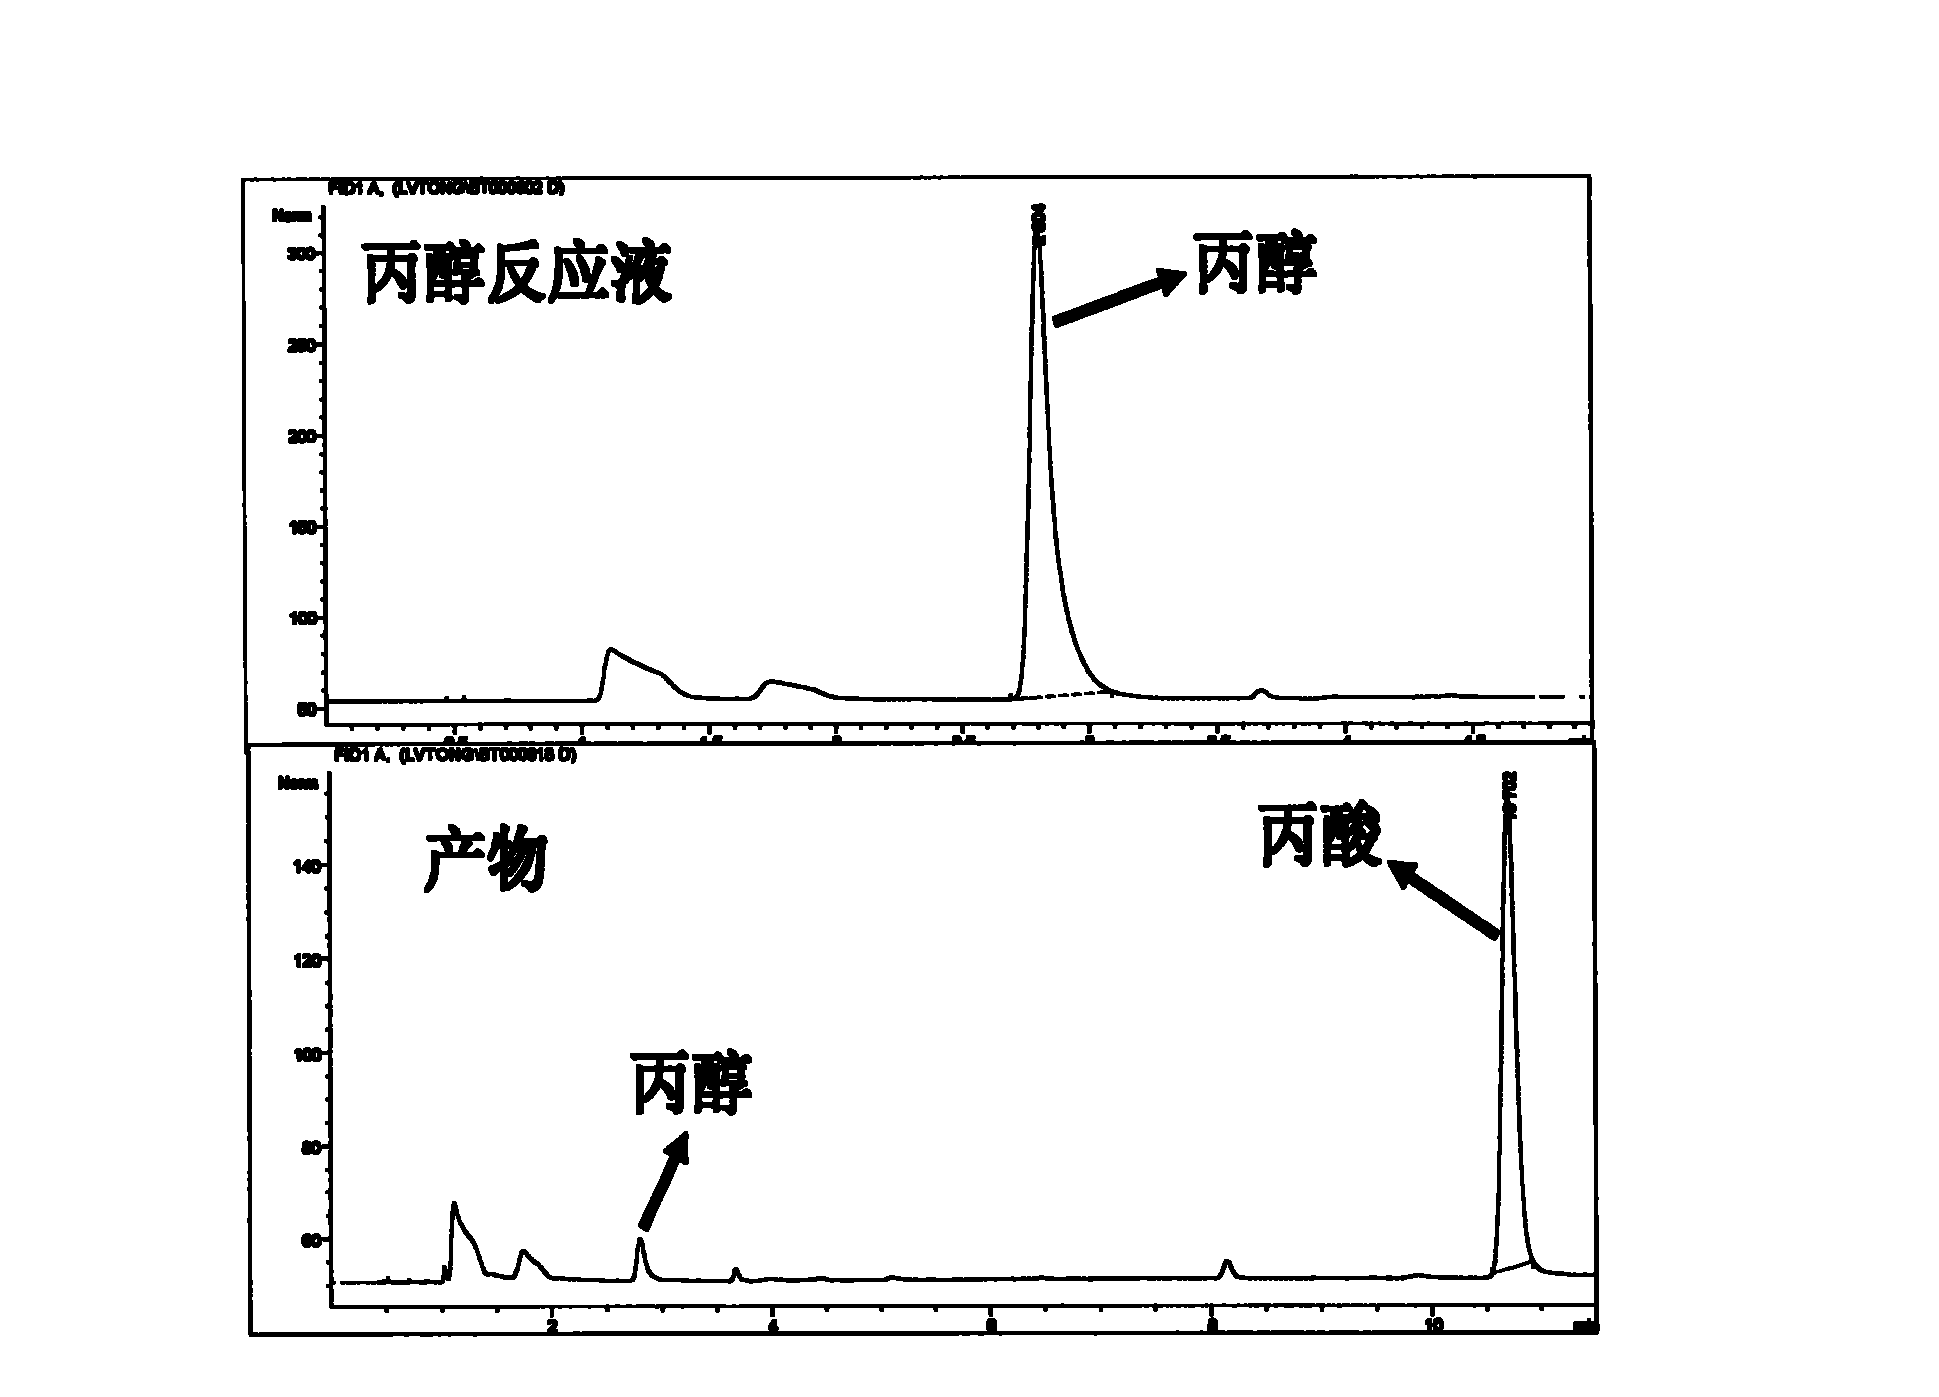 Method for preparing aldehydes or acids by selectively performing catalytic oxidation on alcohols by electro-catalysis membrane